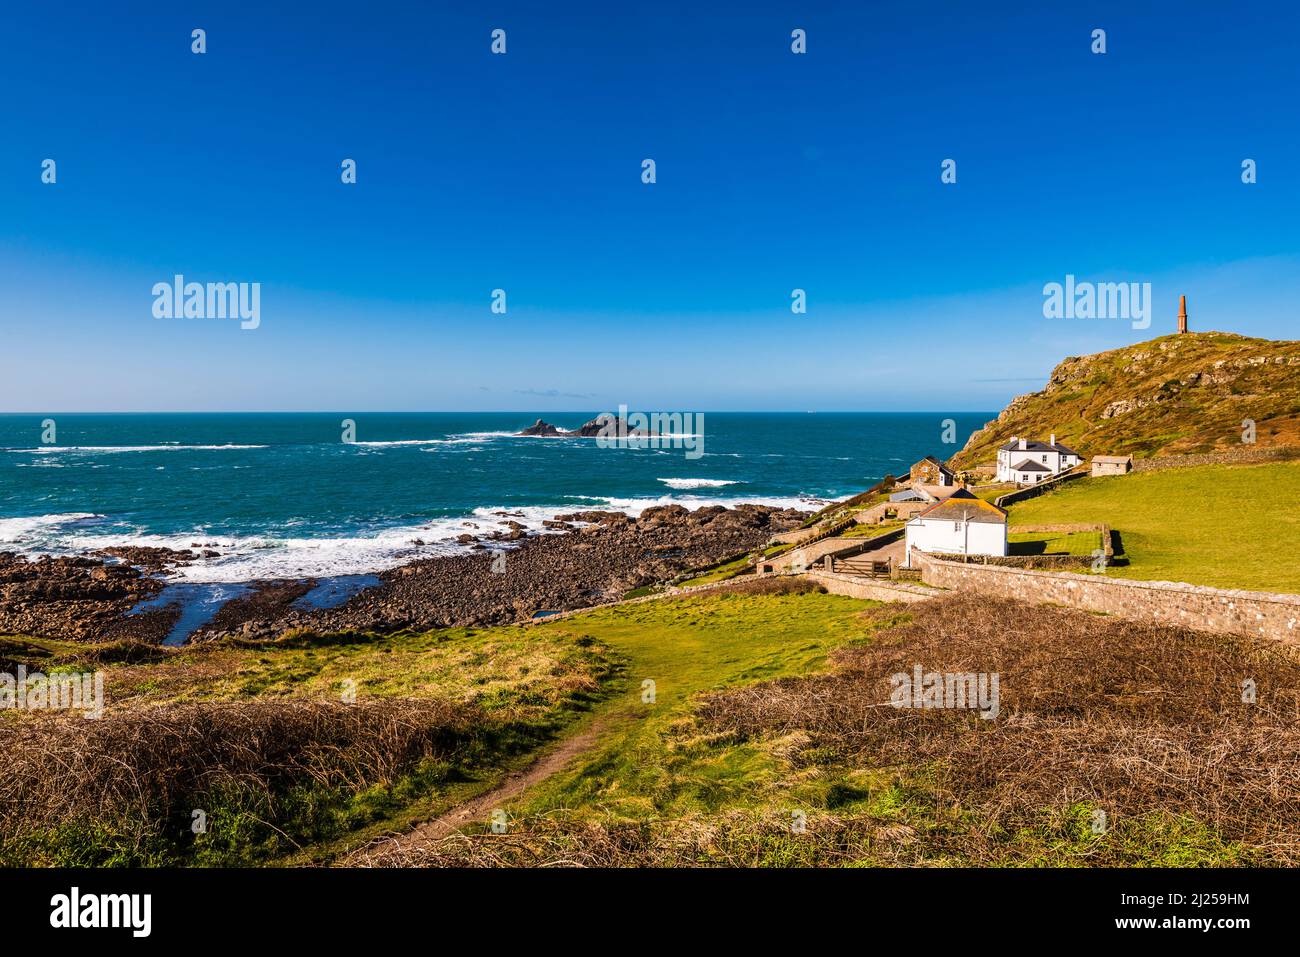 Looking out across Priest's Cove to The Brisons rocks at Cape Cornwall, near Land's End, Penzance, Cornwall, UK Stock Photo